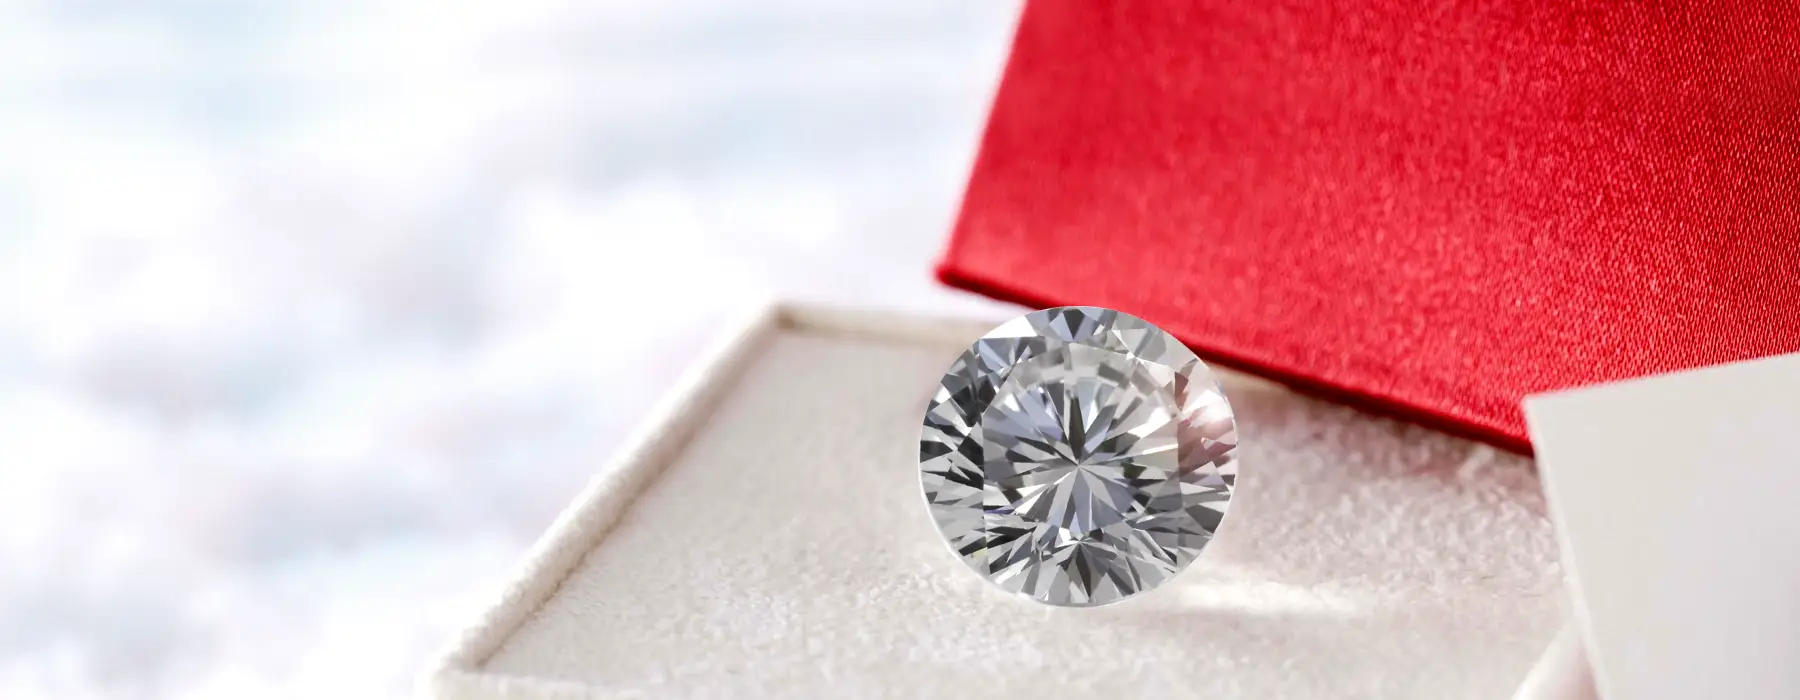 learn the difference between lab diamonds and natural diamond in Canada